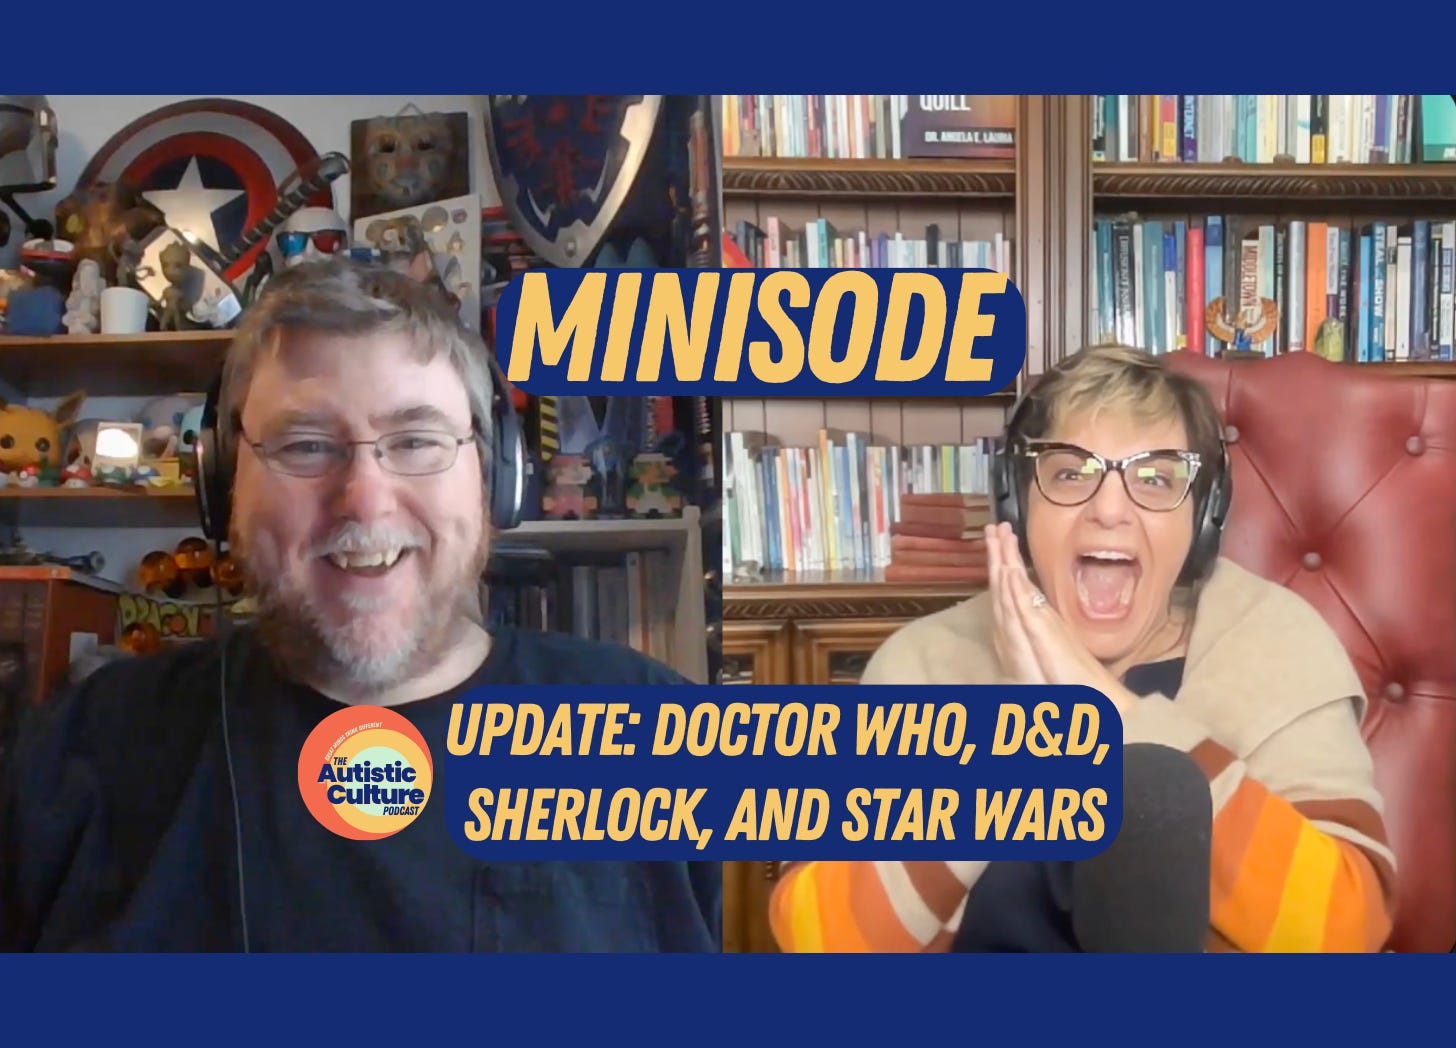 Listen to Autistic podcast hosts discuss: Update on Doctor Who, D&D, Sherlock, and Star Wars. Autism Podcast | Was Peter Cushing on the Autism Spectrum?  Listen in to learn about this Autistic actor and the Autistic characters he played!  Plus, what Autistic activities and special interests he loved.